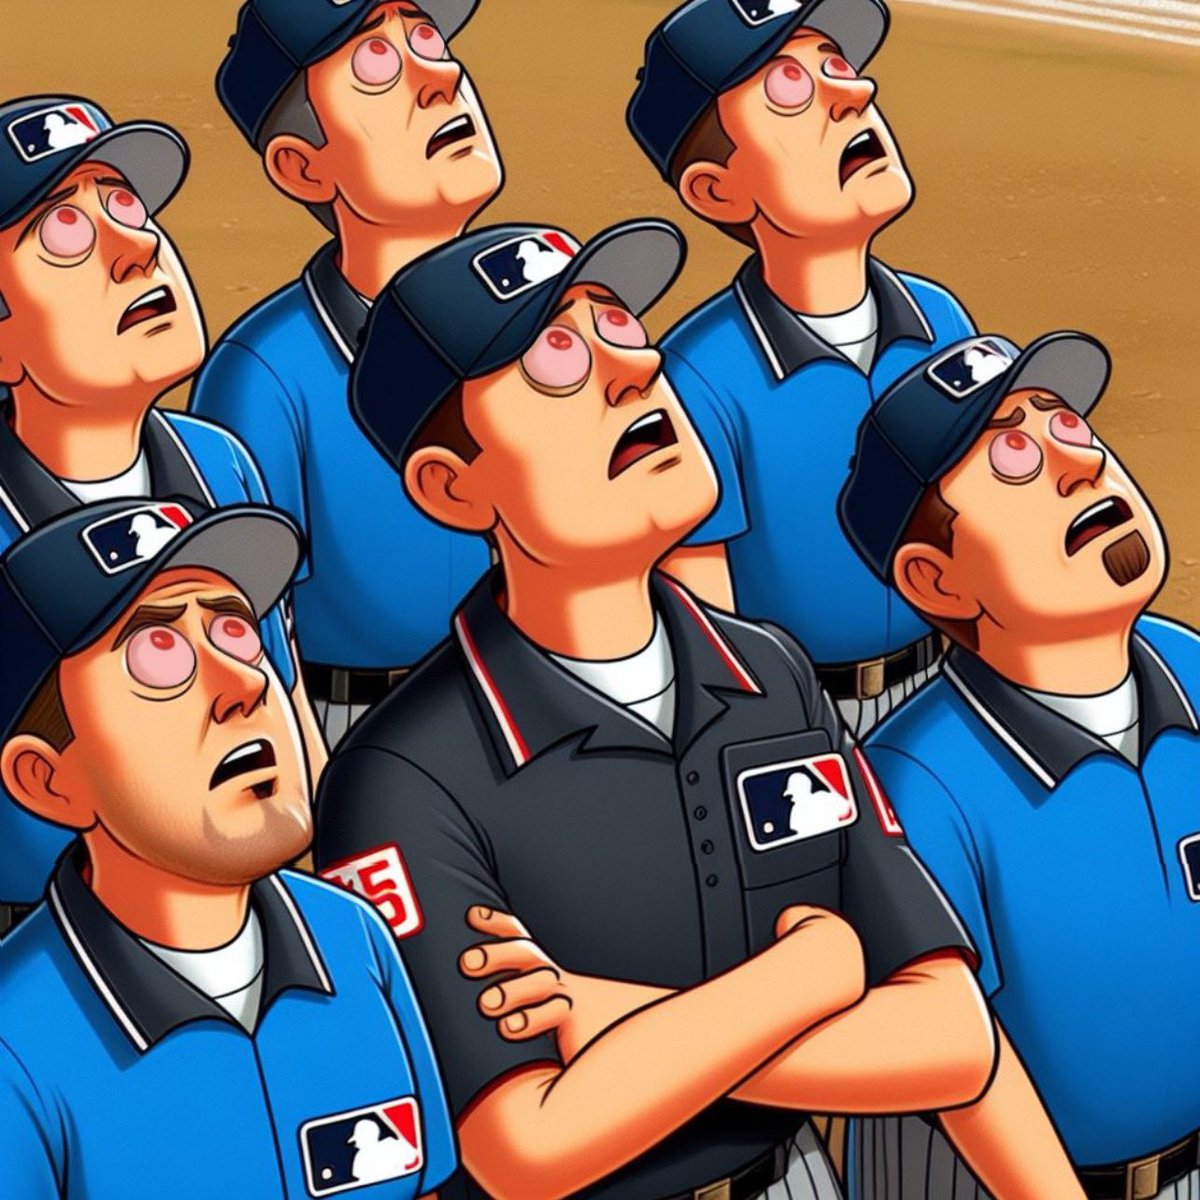 MLB taking advantage of the eclipse to train a new wave of umpires